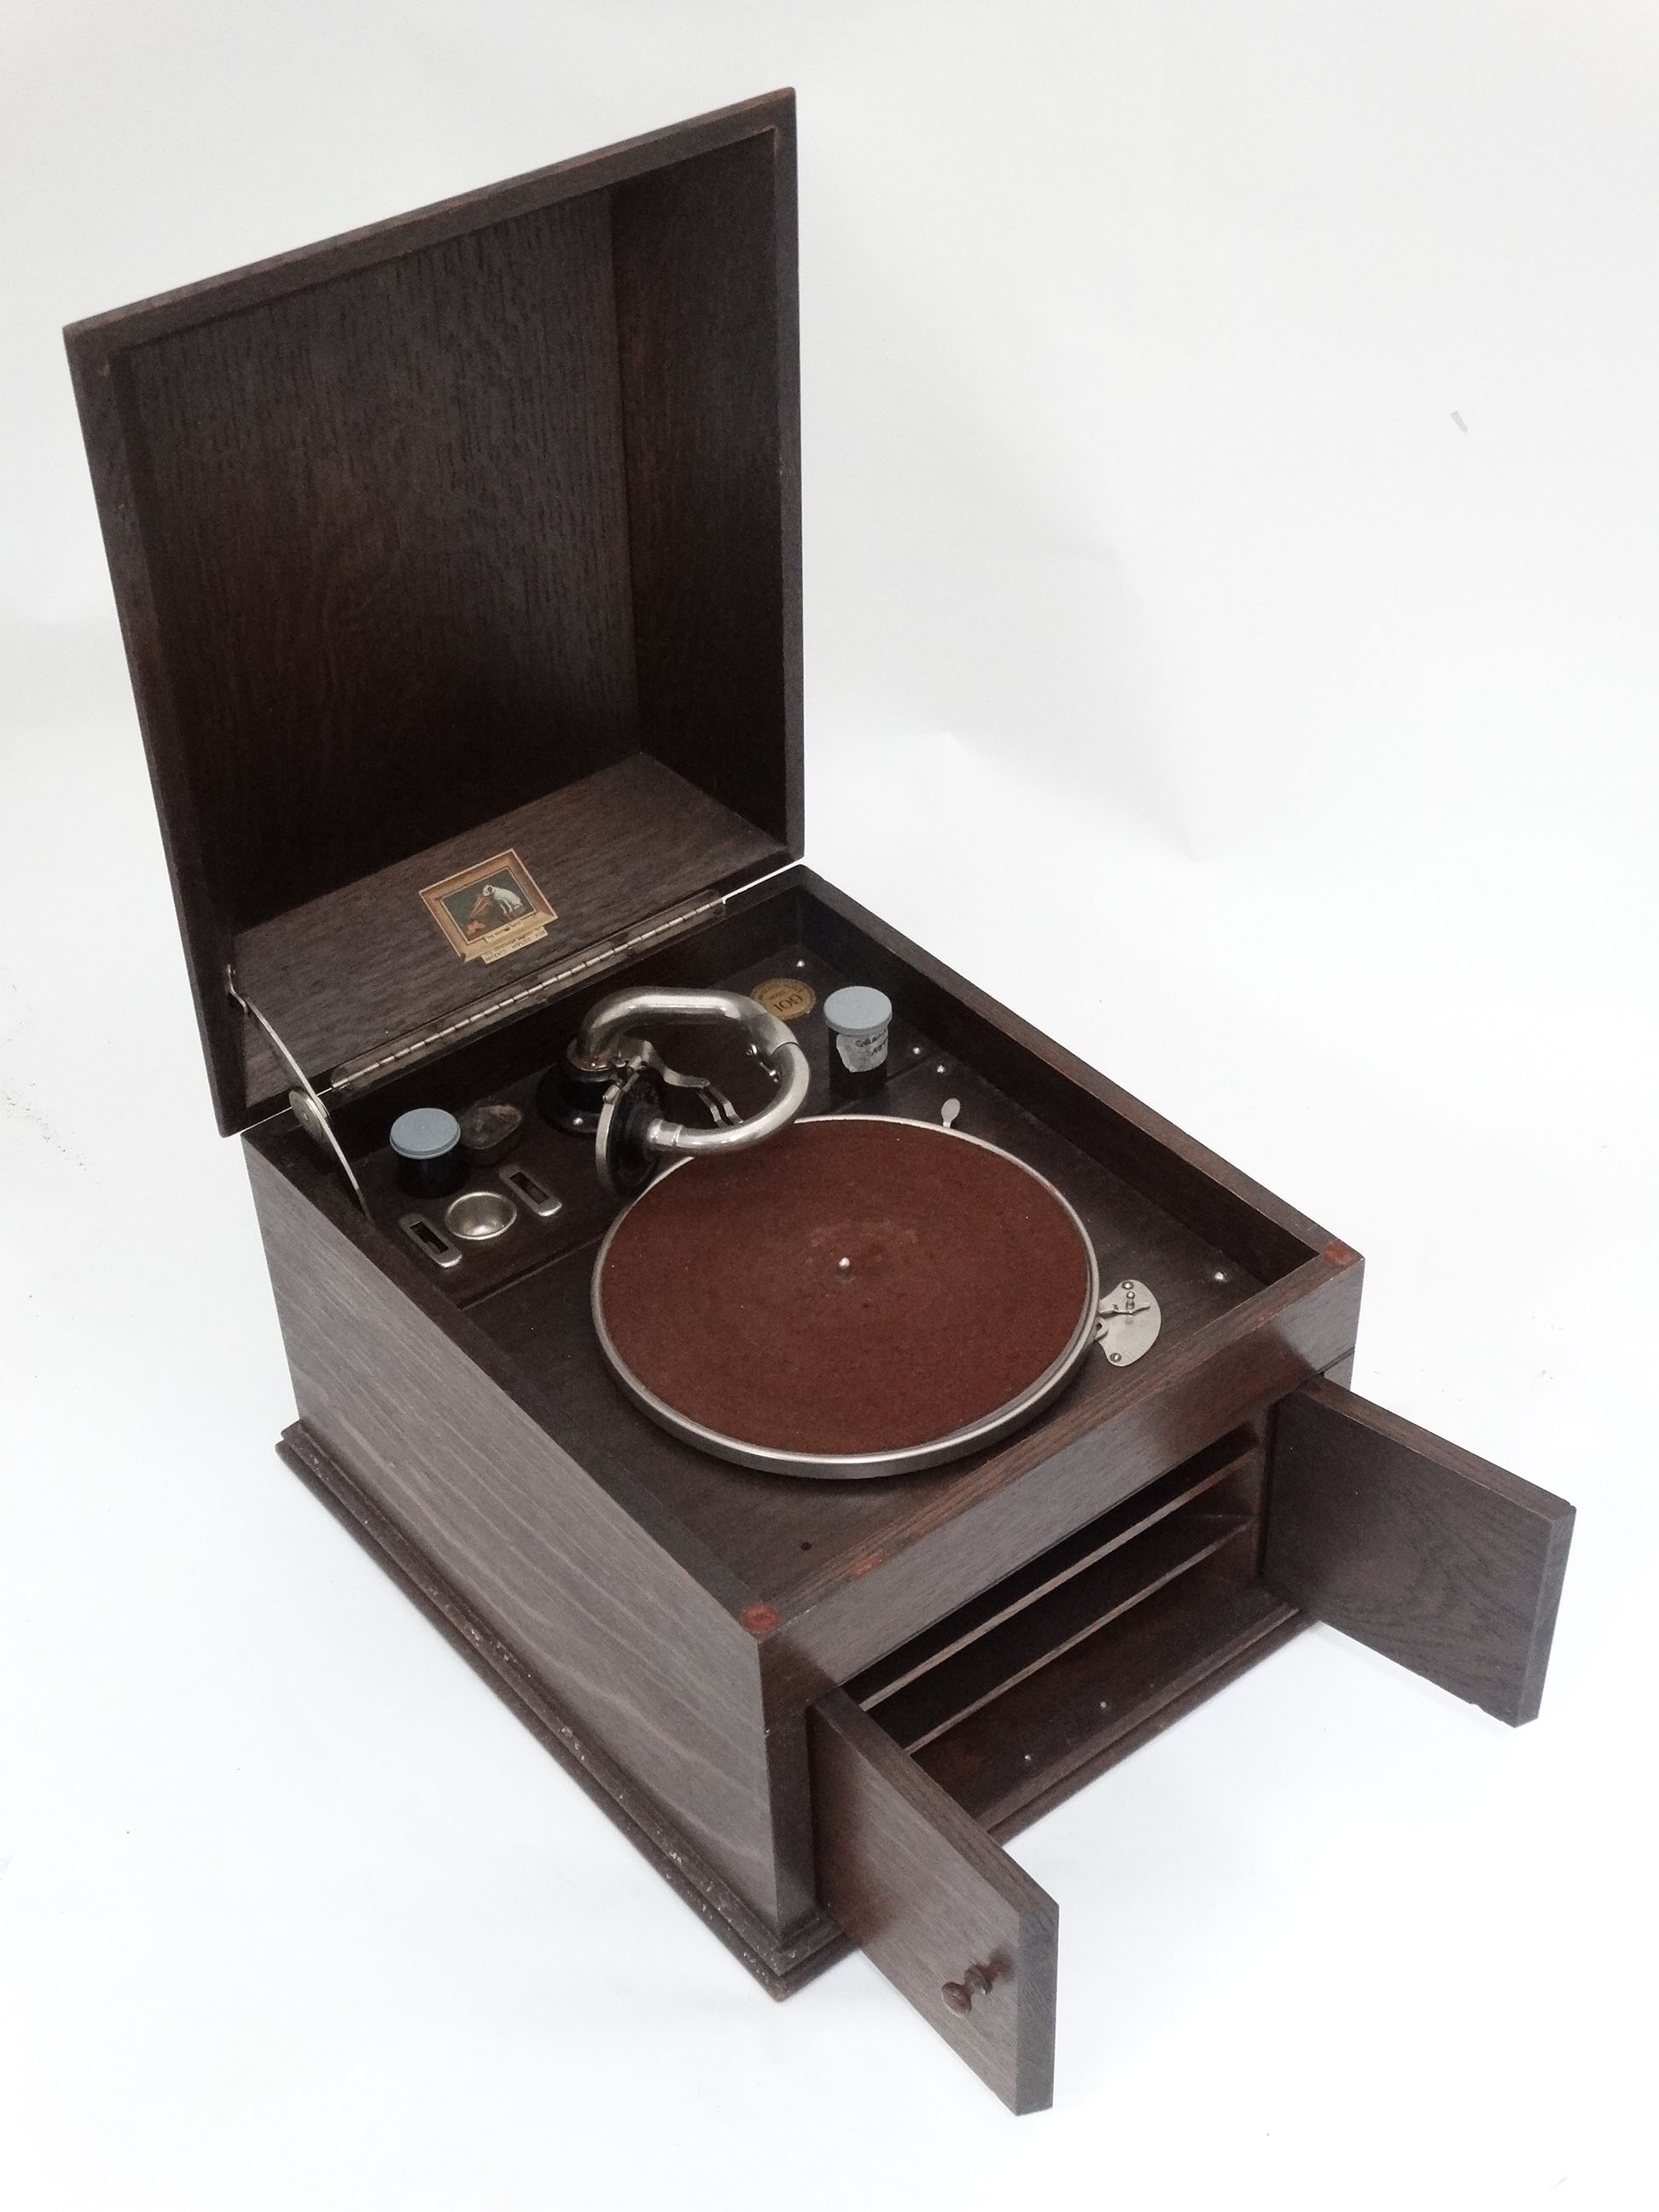 HMV gramophone with 2 records - Stamped ' George E Smith Ltd. - Image 5 of 7